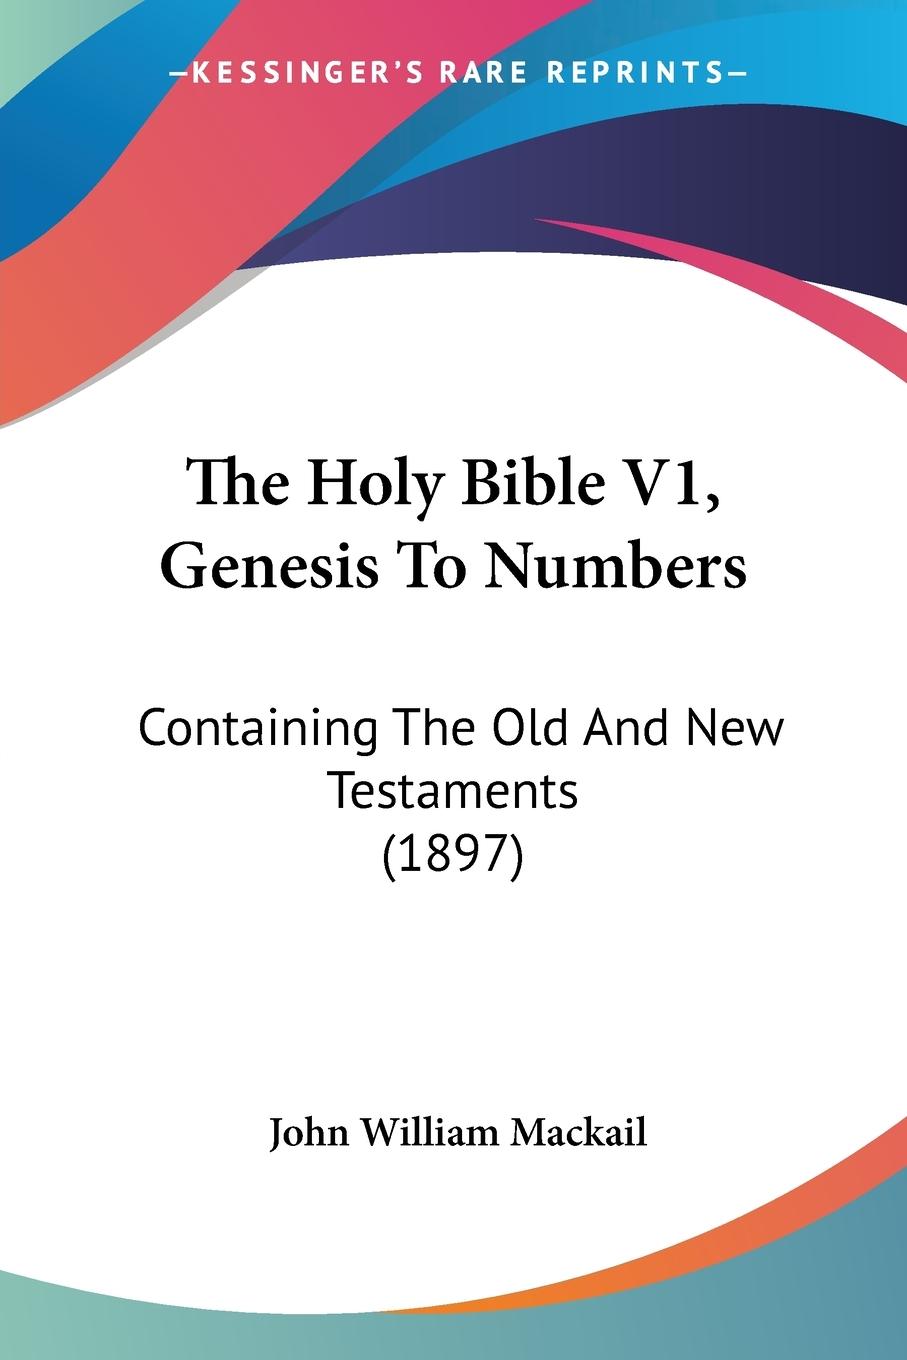 The Holy Bible V1, Genesis To Numbers